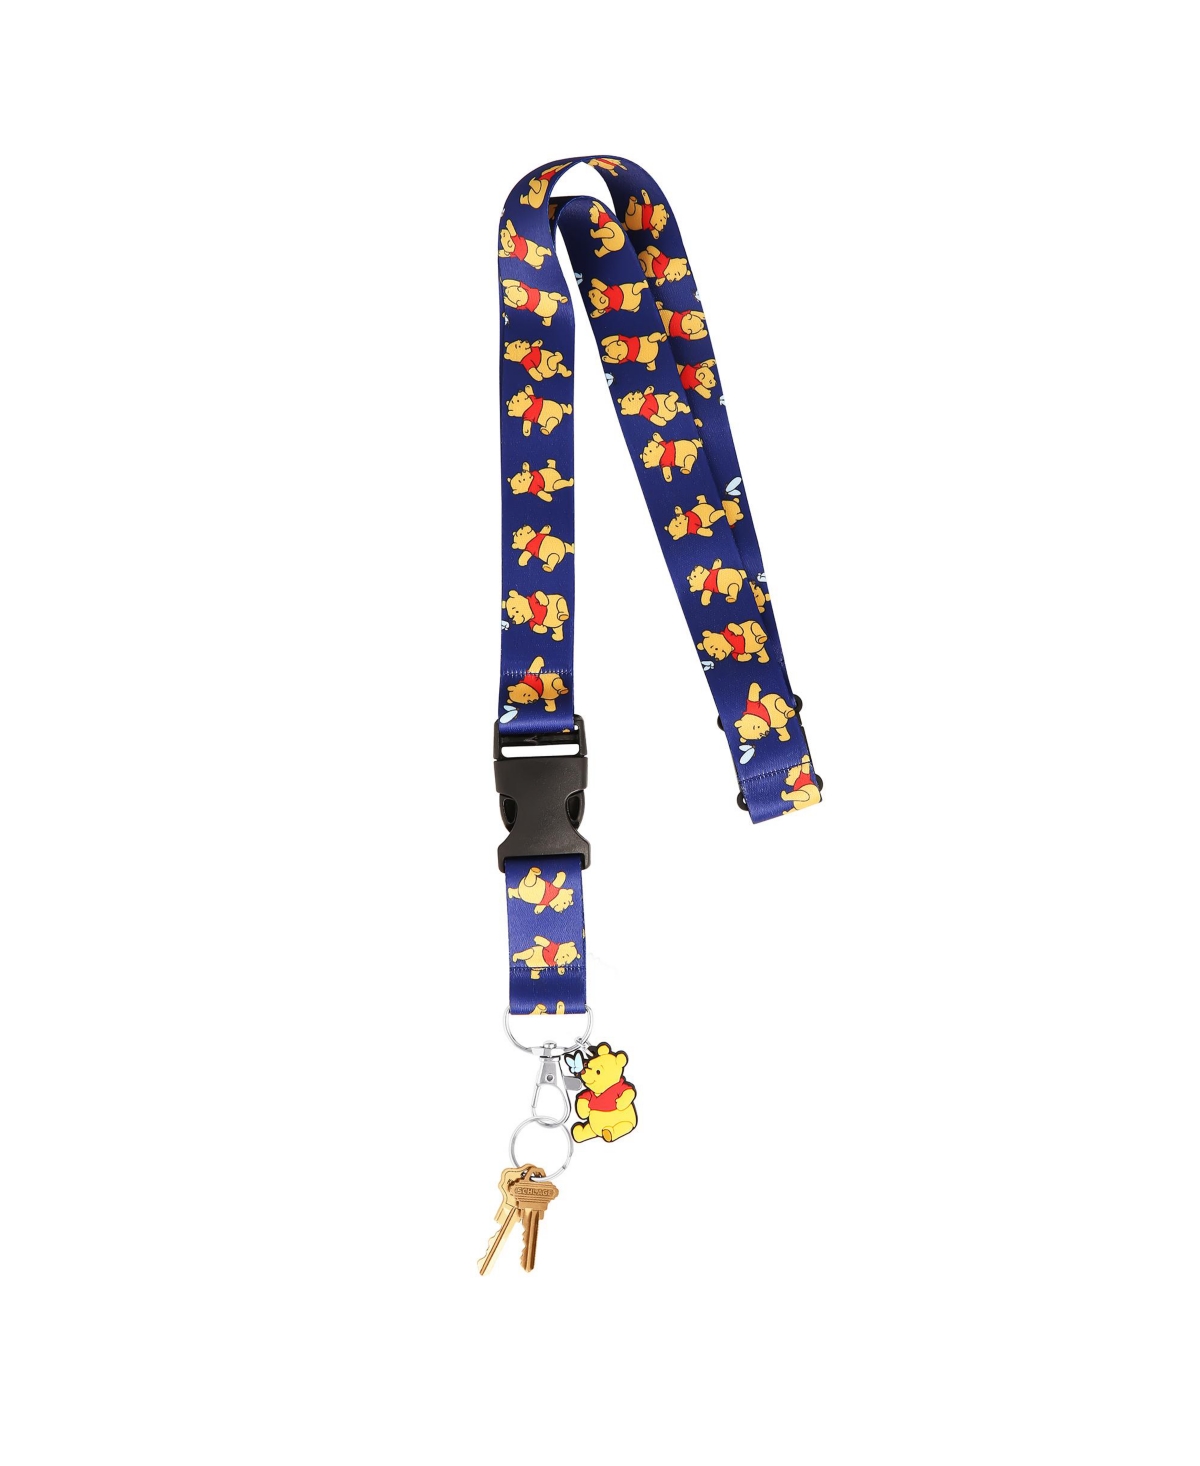 Winnie the Pooh Lanyard - Lanyards for Keys - Neck Lanyard with Winnie the Pooh Charm - Yellow, blue, red